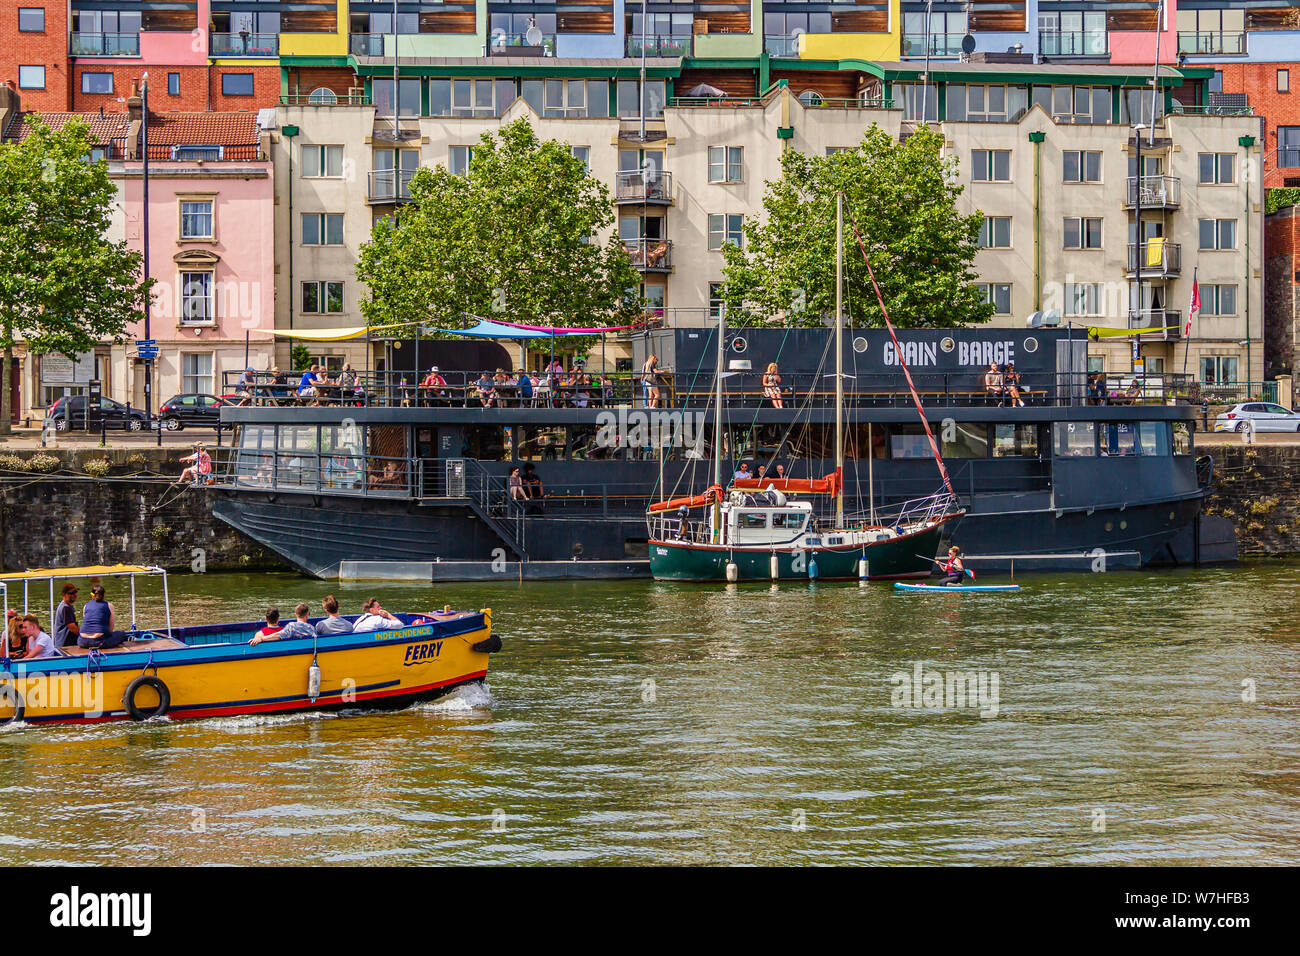 A ferry passing the Grain Barge, a bar in a converted barge and owned by Bristol Beer Factory. Mardyke Wharf, Hotwells, Bristol, UK. July 2019. Stock Photo